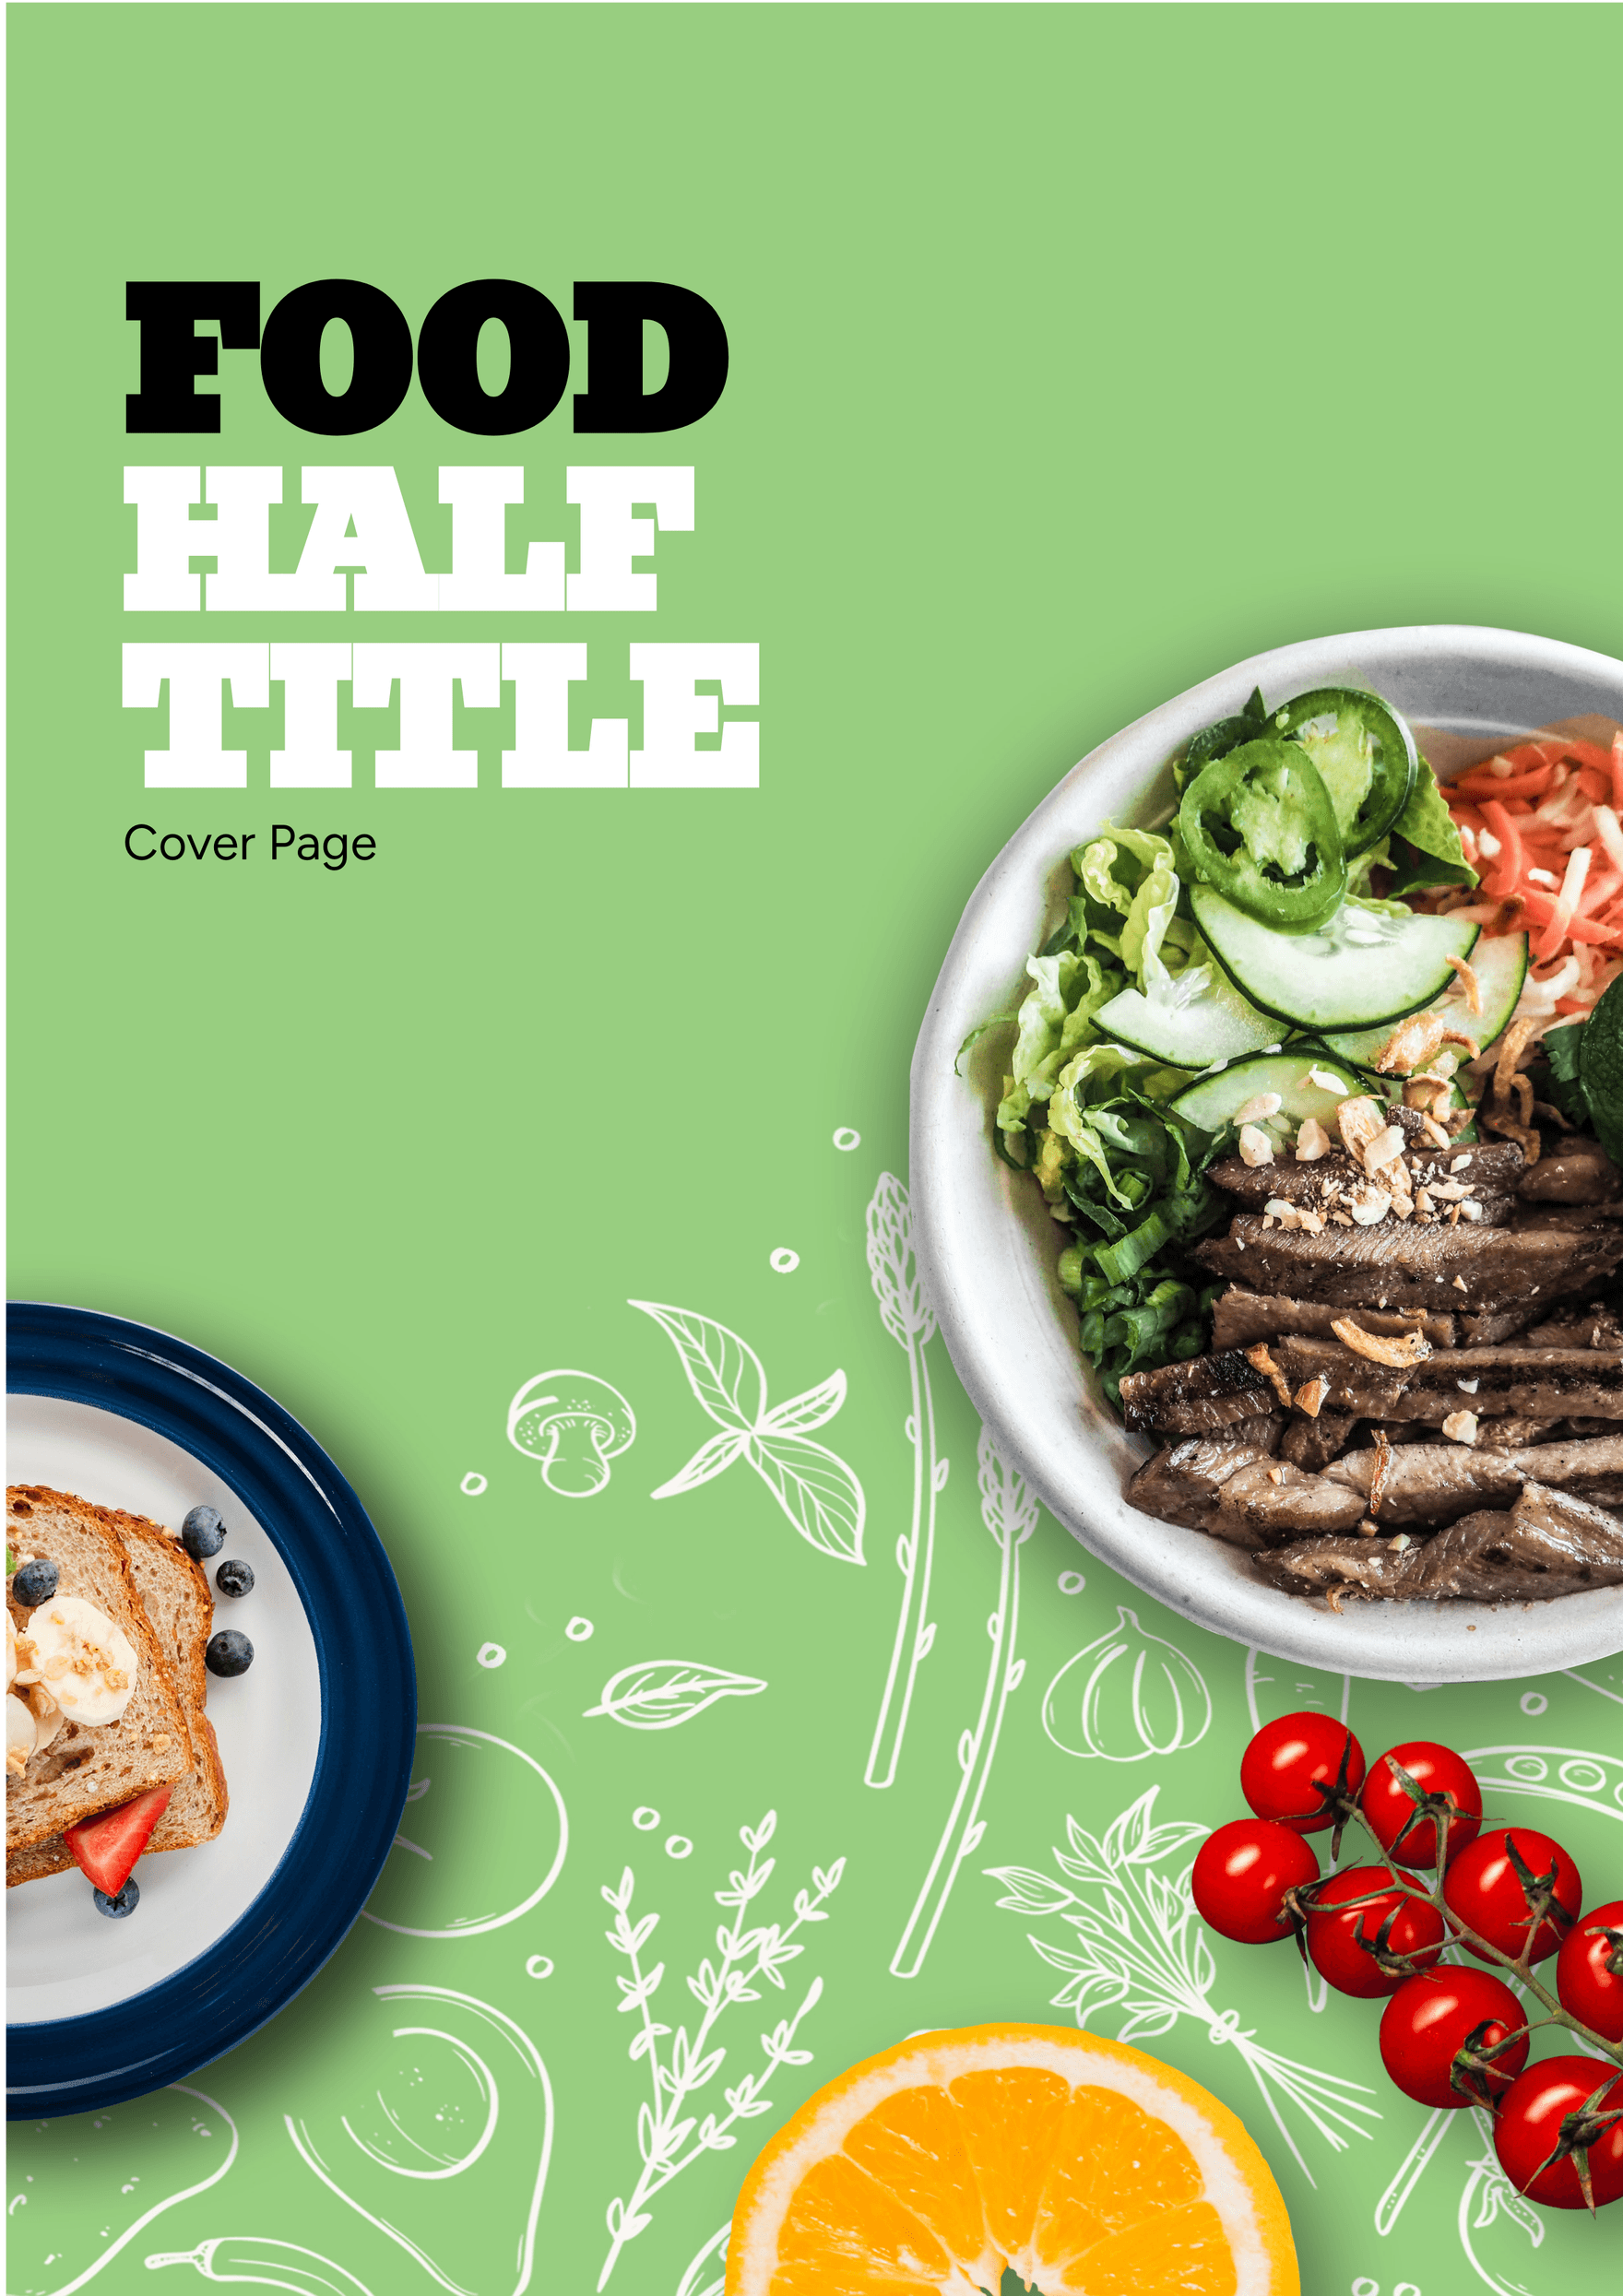 Food Half Title Cover Page Template